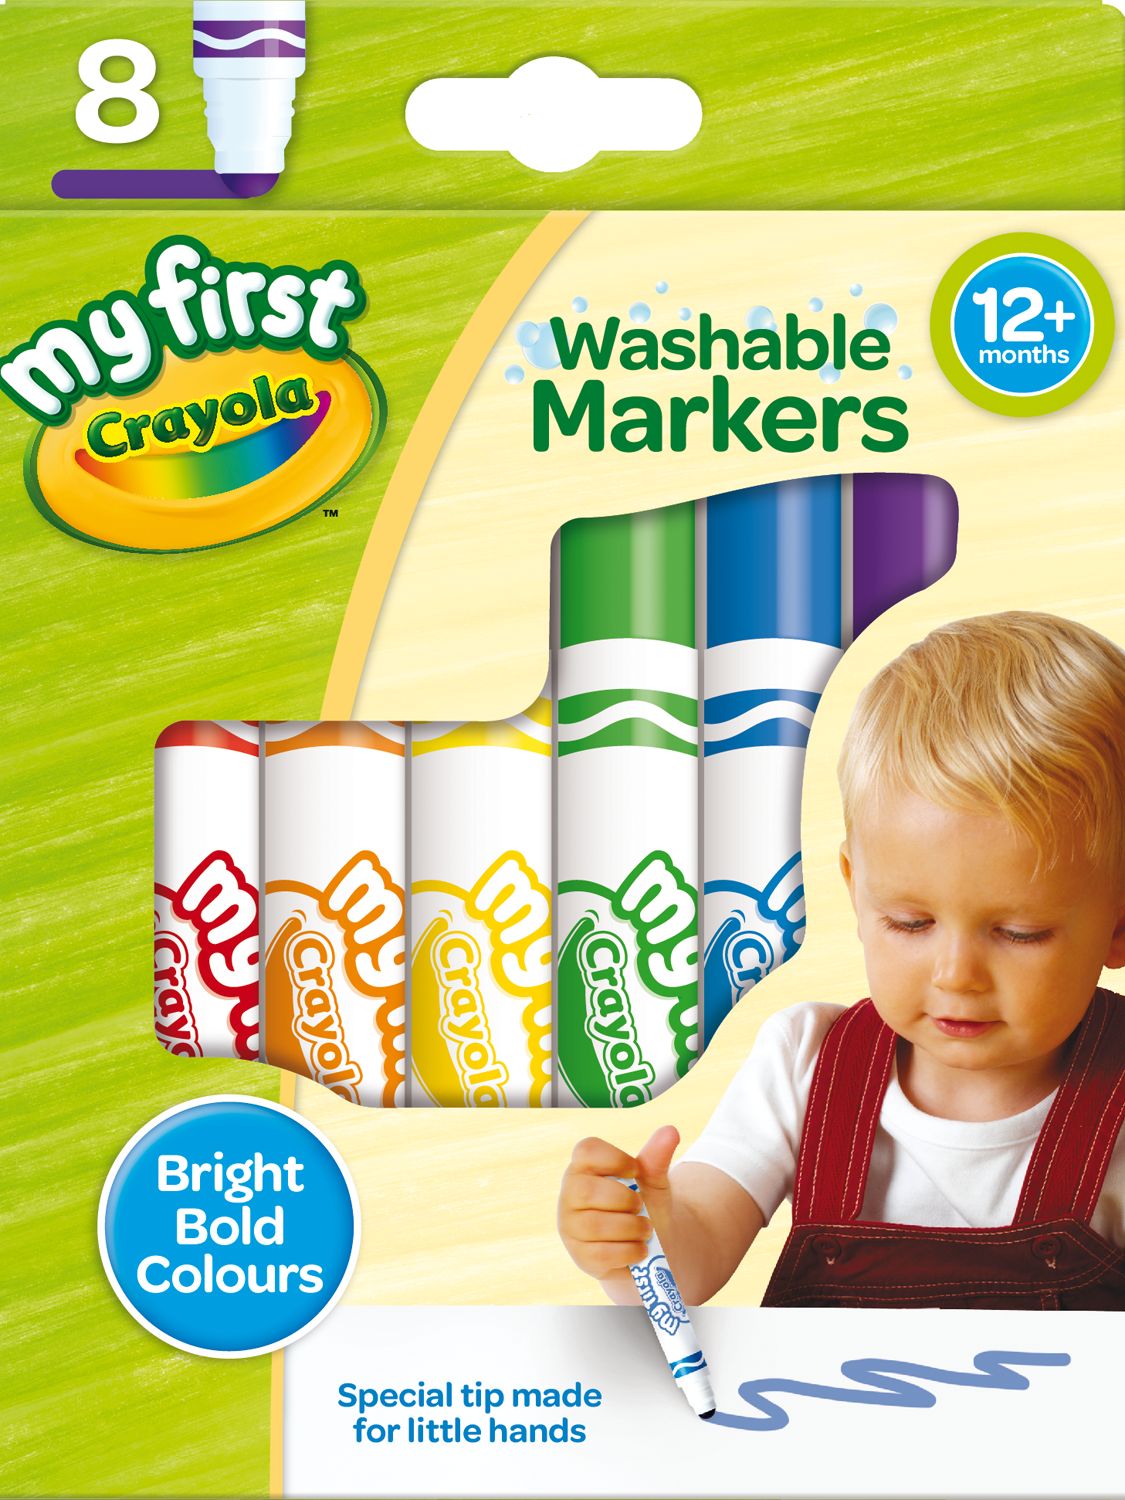 Crayola No-Drip Paint Brush Pens, Assorted Colors Set, 40 Count, Creative  Gift for Kids and Teens